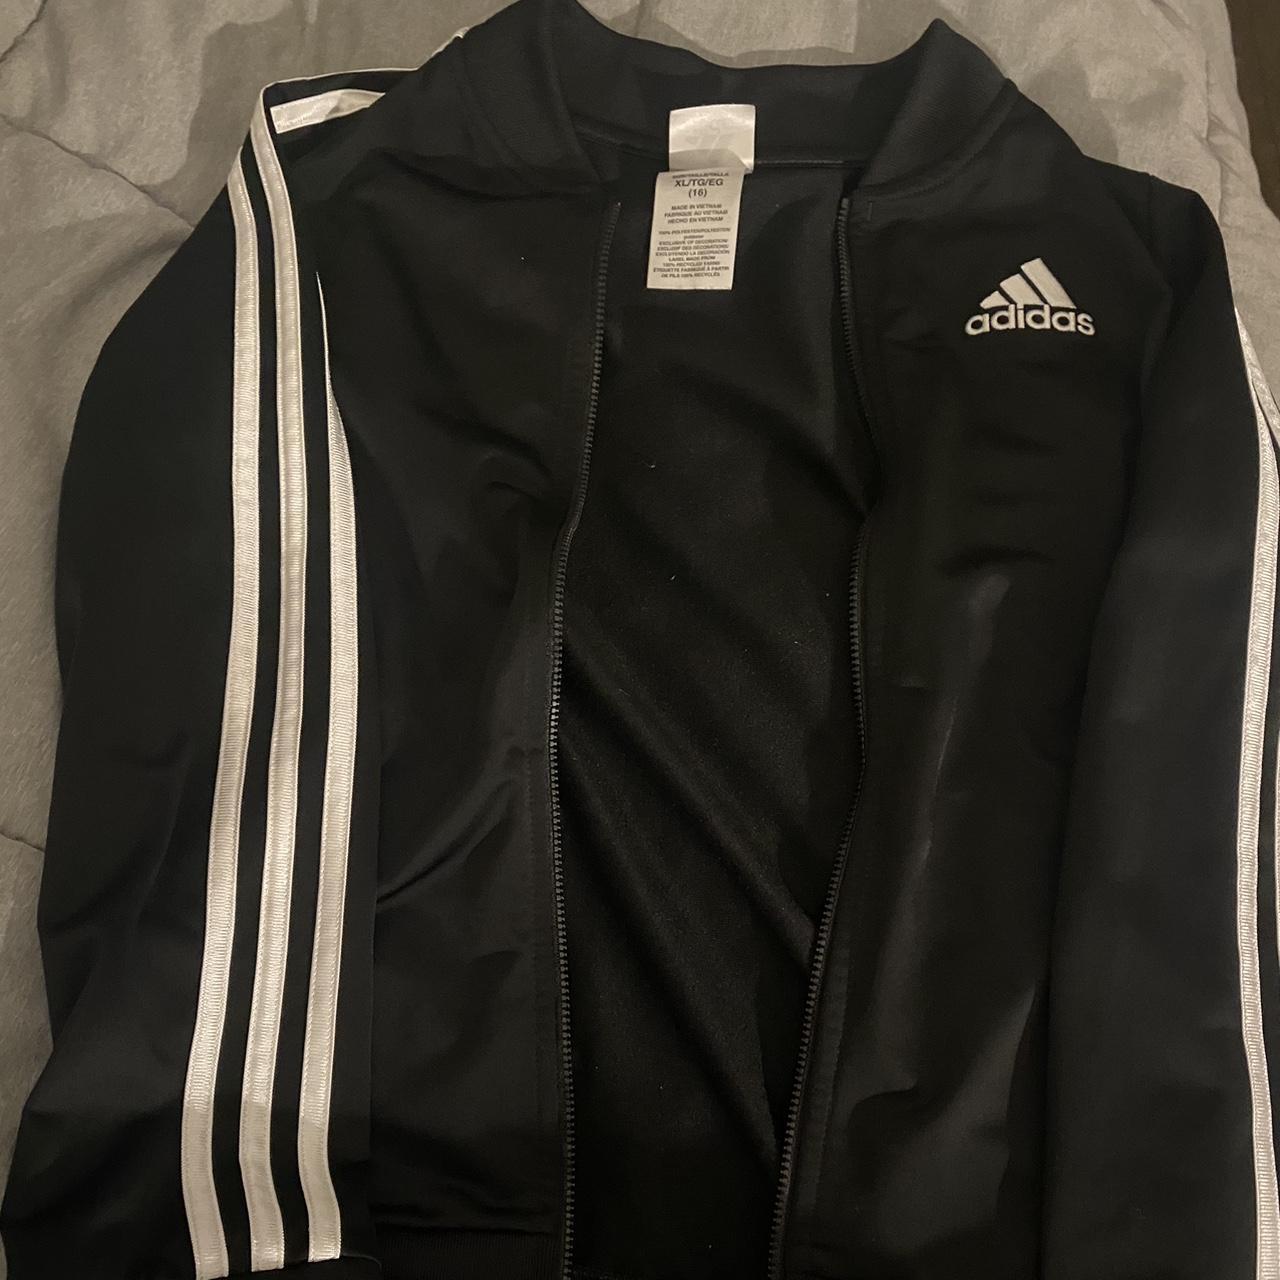 Adidas zip-up jacket🩶. Extra Large in kids , fits... - Depop